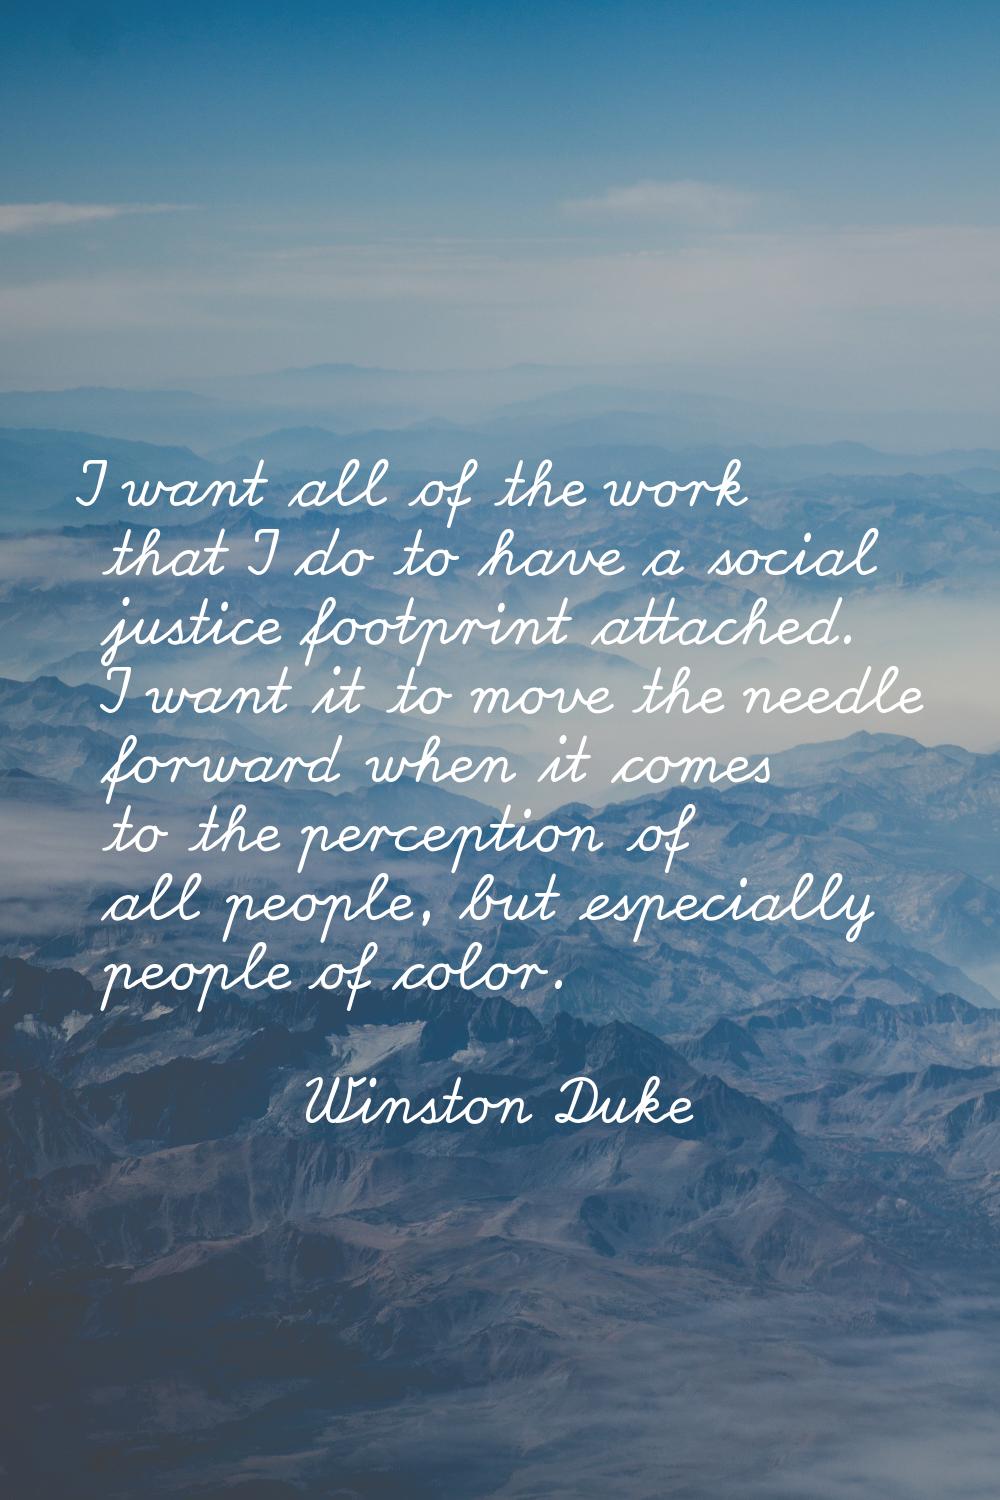 I want all of the work that I do to have a social justice footprint attached. I want it to move the